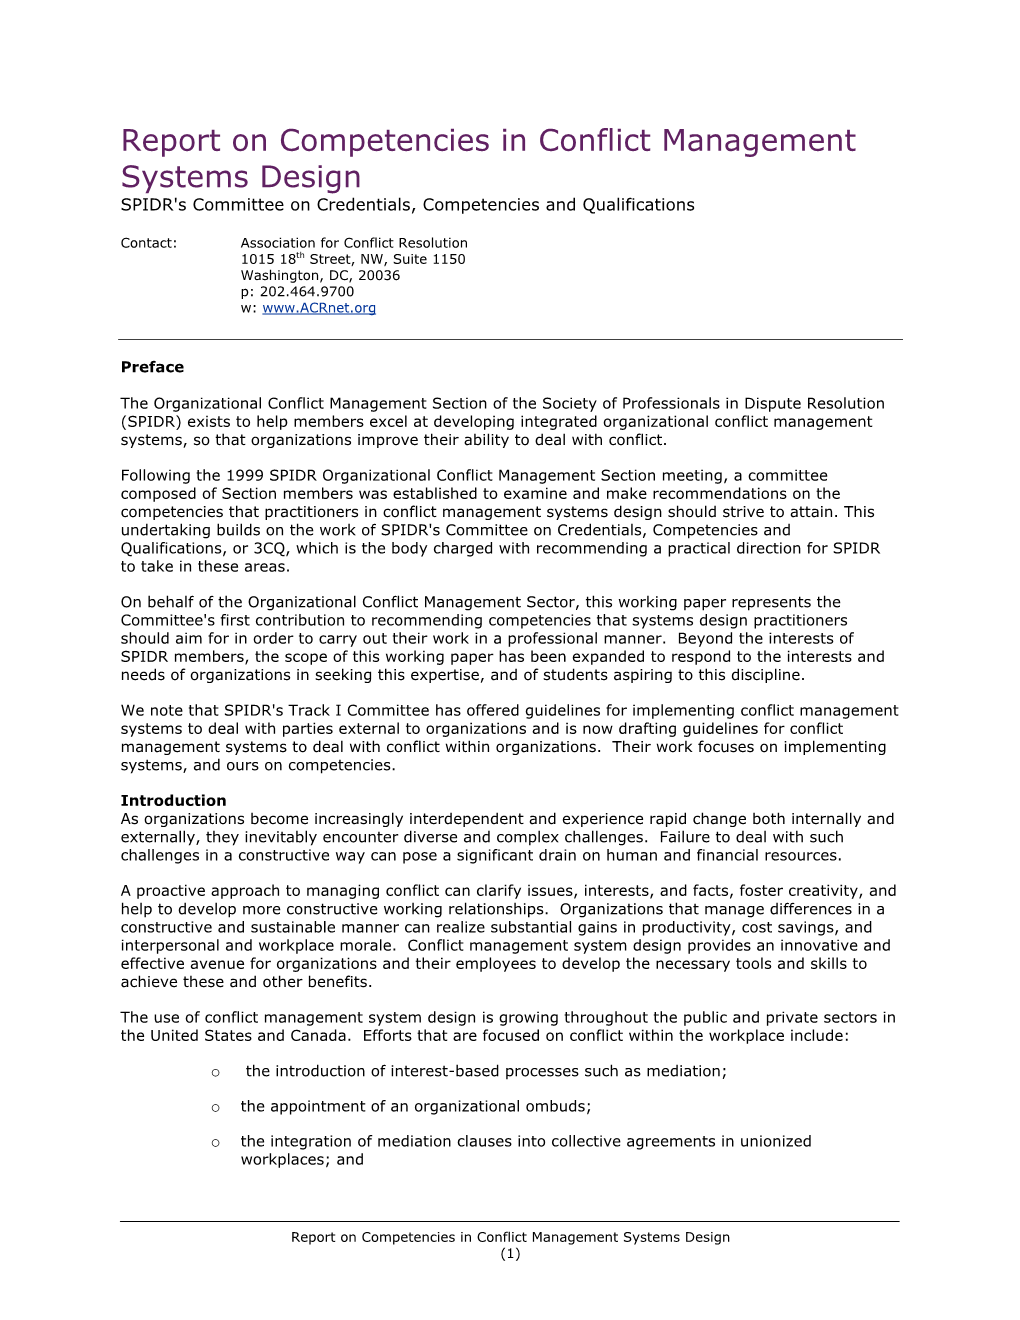 Report on Competencies in Conflict Management Systems Design SPIDR's Committee on Credentials, Competencies and Qualifications